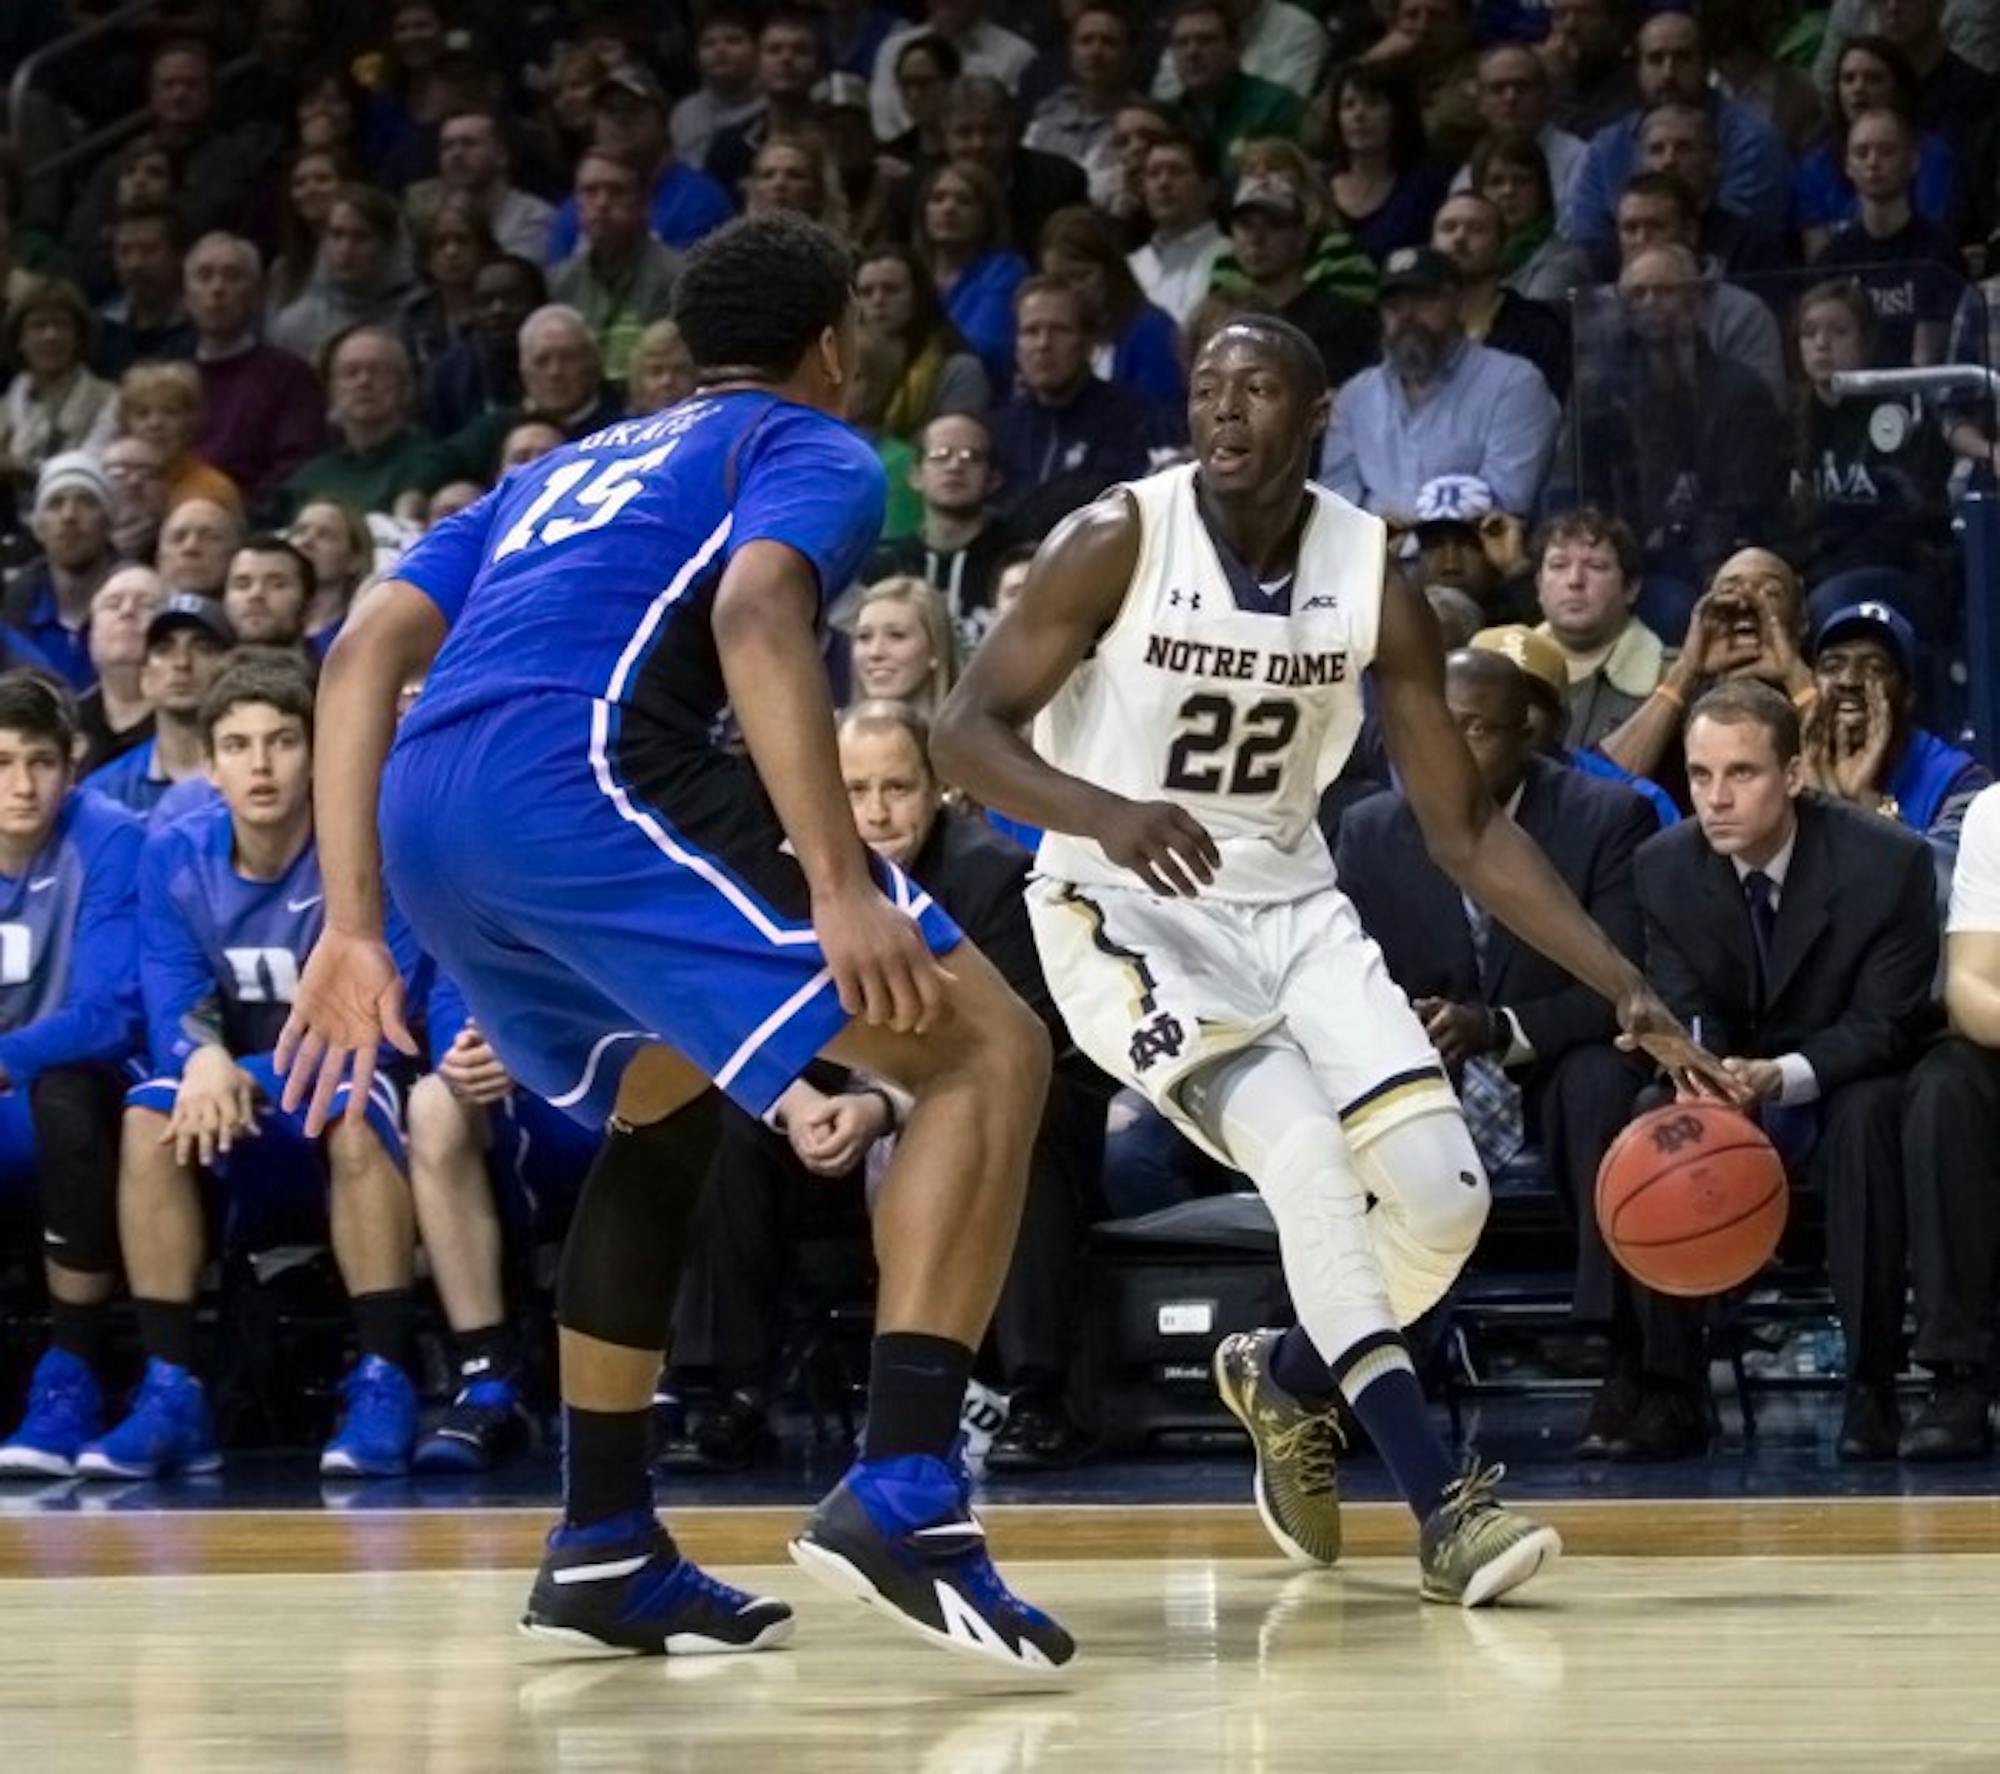 Irish senior guard Jerian Grant is guarded by Duke freshman center Jahlil Okafor during Notre Dame's 77-73 win at Purcell Pavilion on Wednesday. Both players recorded double-doubles.